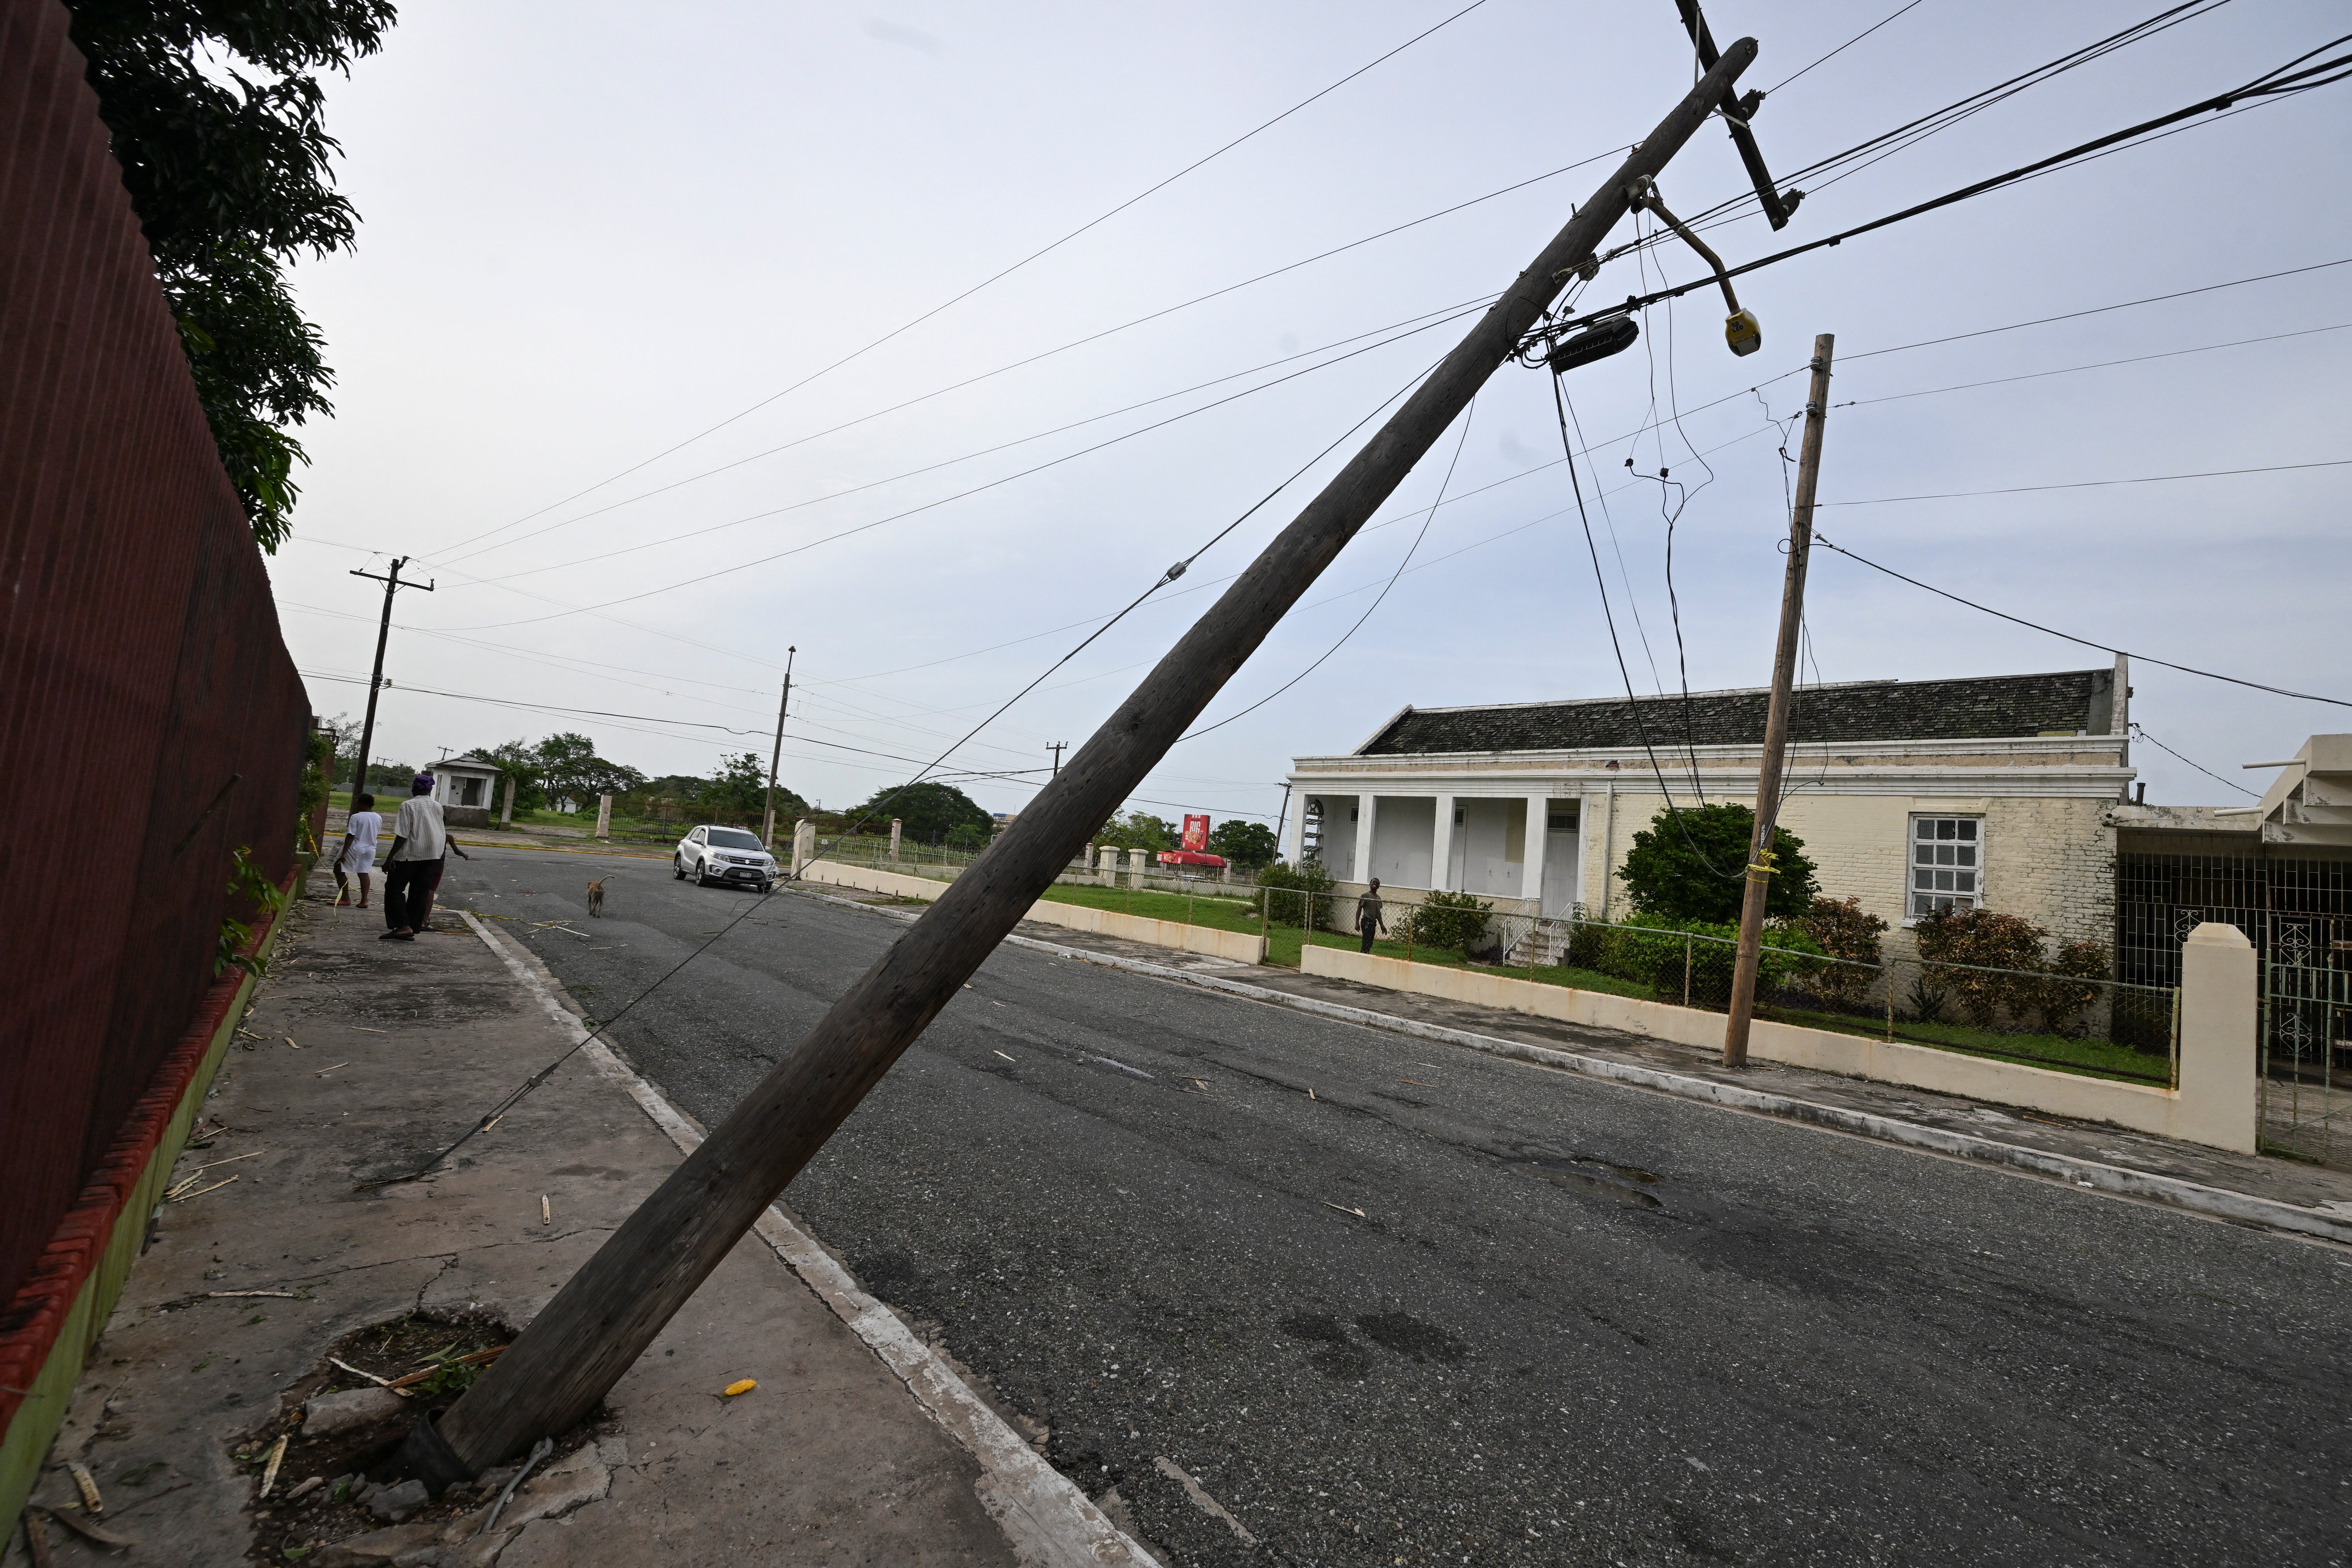 An uprooted light pole pictured in Kingston, Jamaica on Thursday after Hurricane Beryl